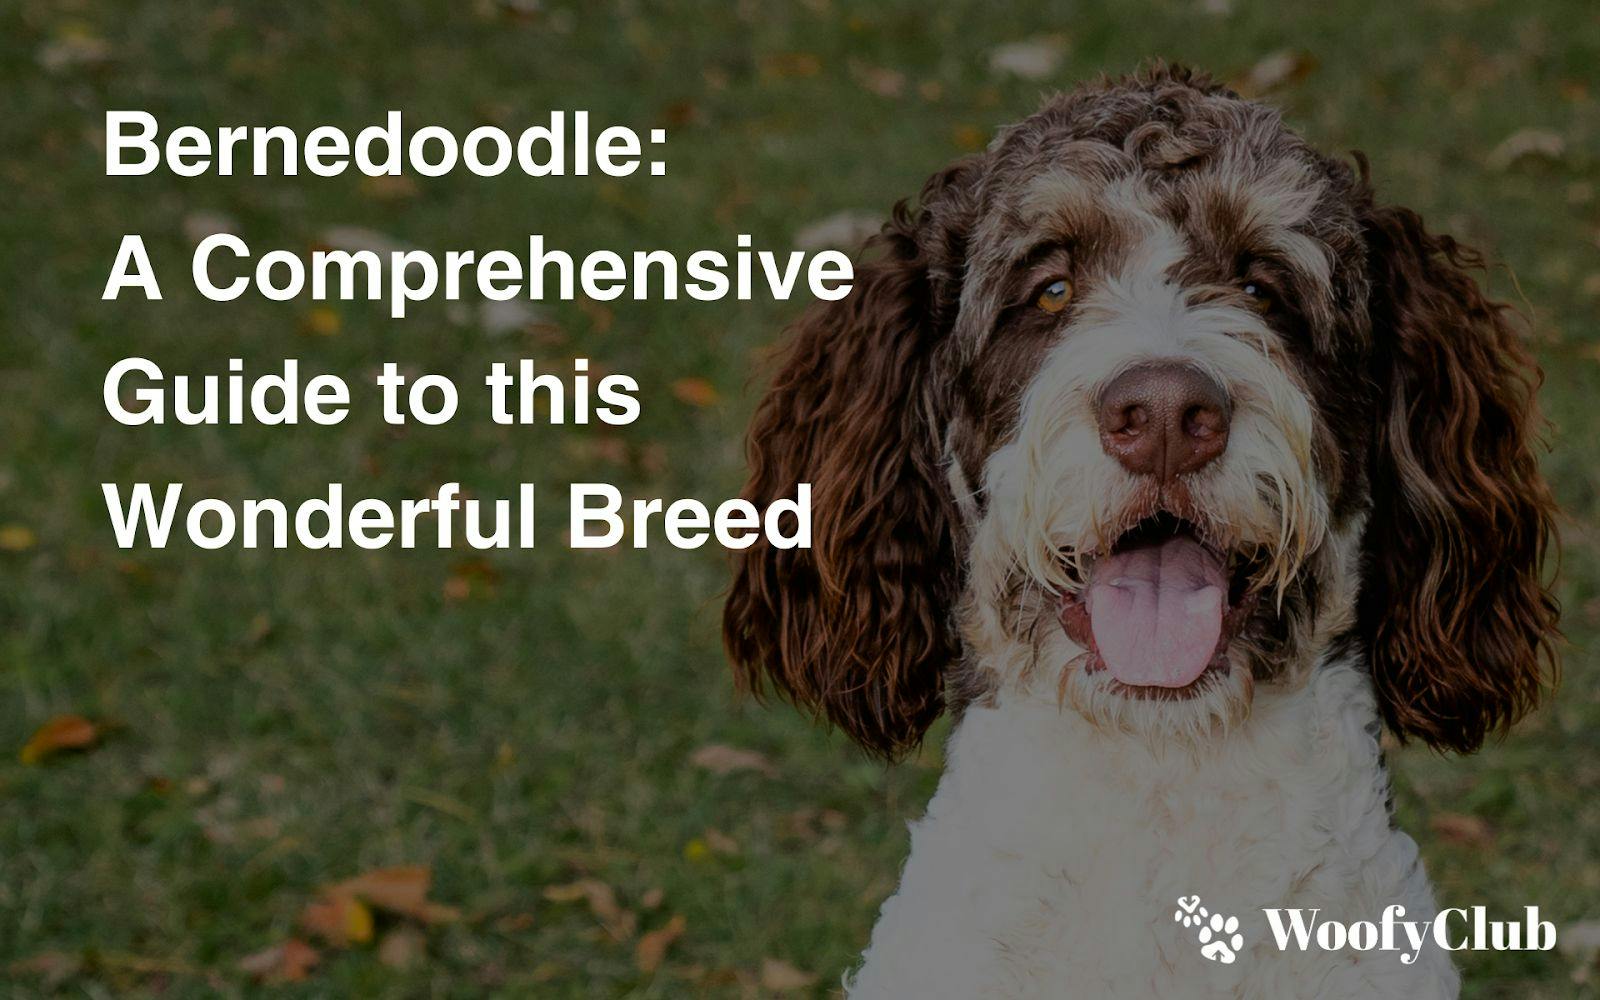 Bernedoodle: A Comprehensive Guide To This Wonderful Breed